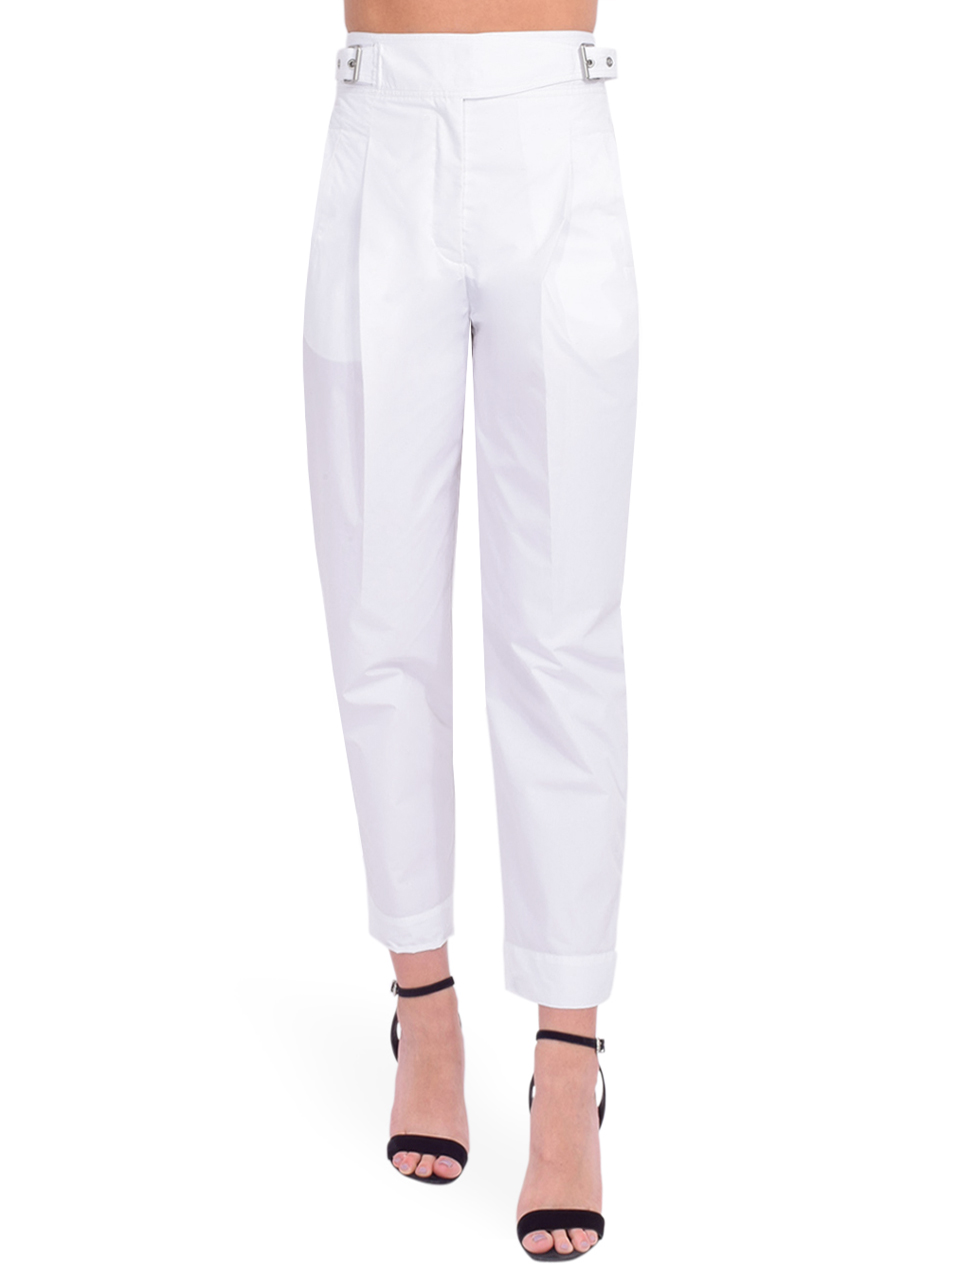 3.1 Phillip Lim Buckle Waistband Trouser in White Front View